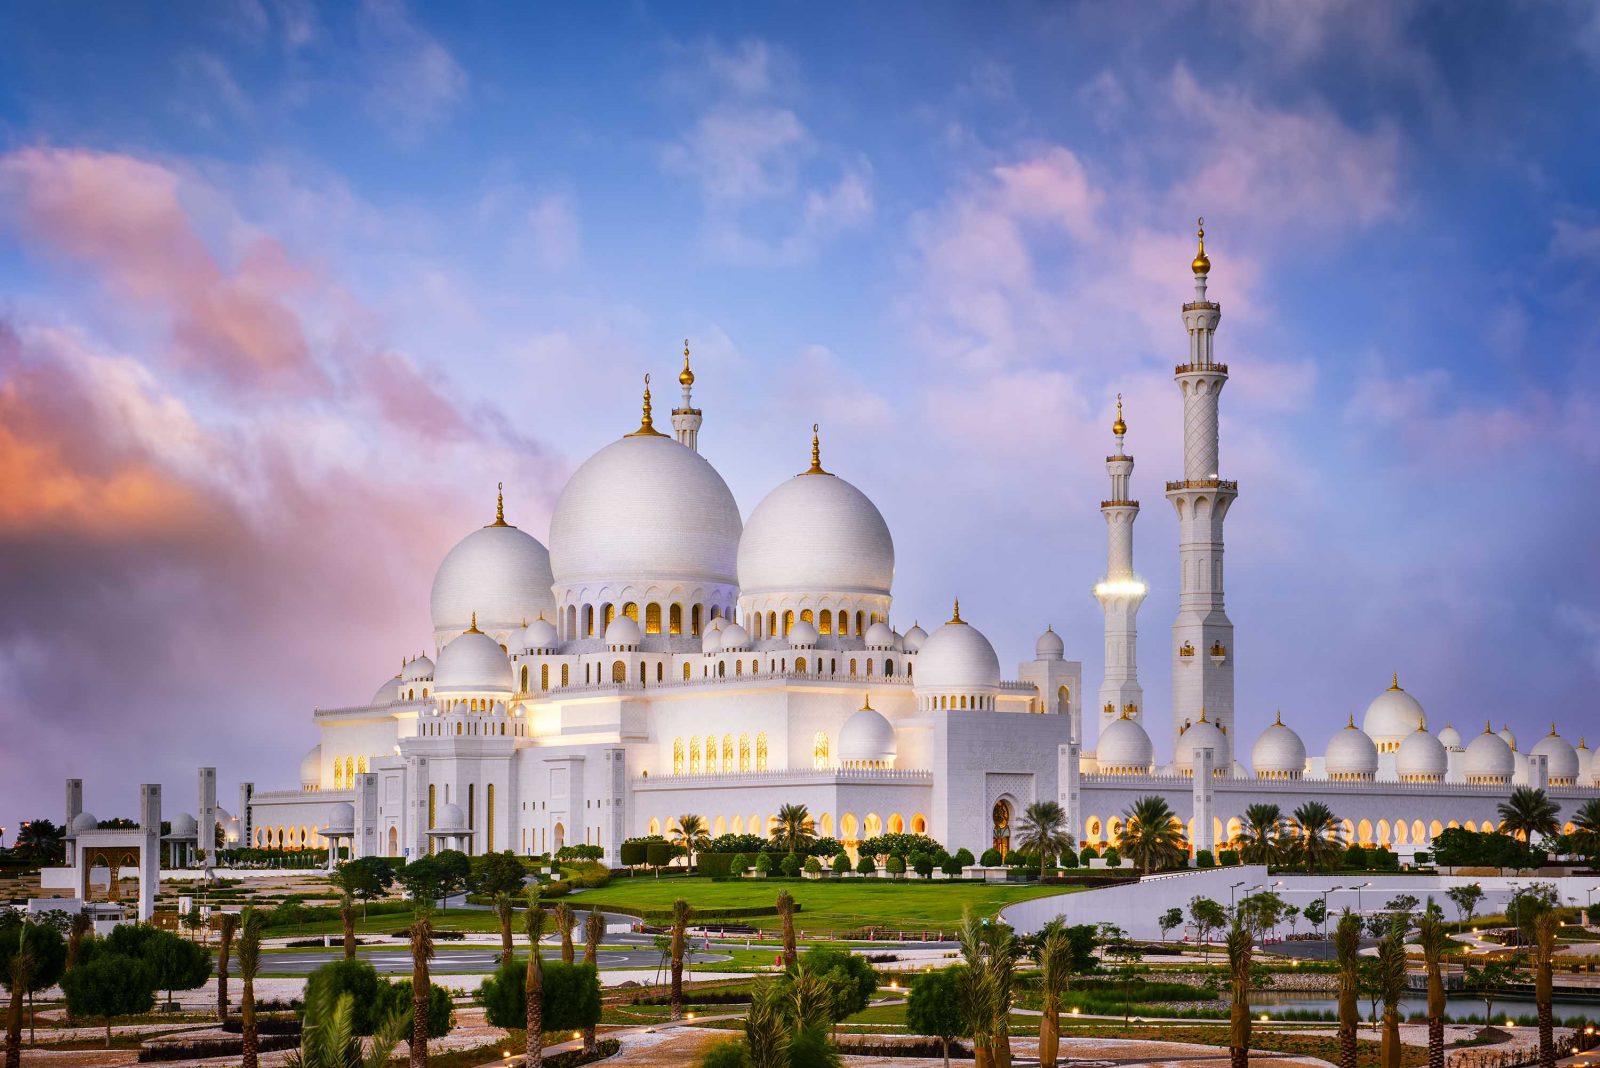 Second Most Famous Sights Sheikh Zayed Grand Mosque, Abu Dhabi, United Arab Emirates